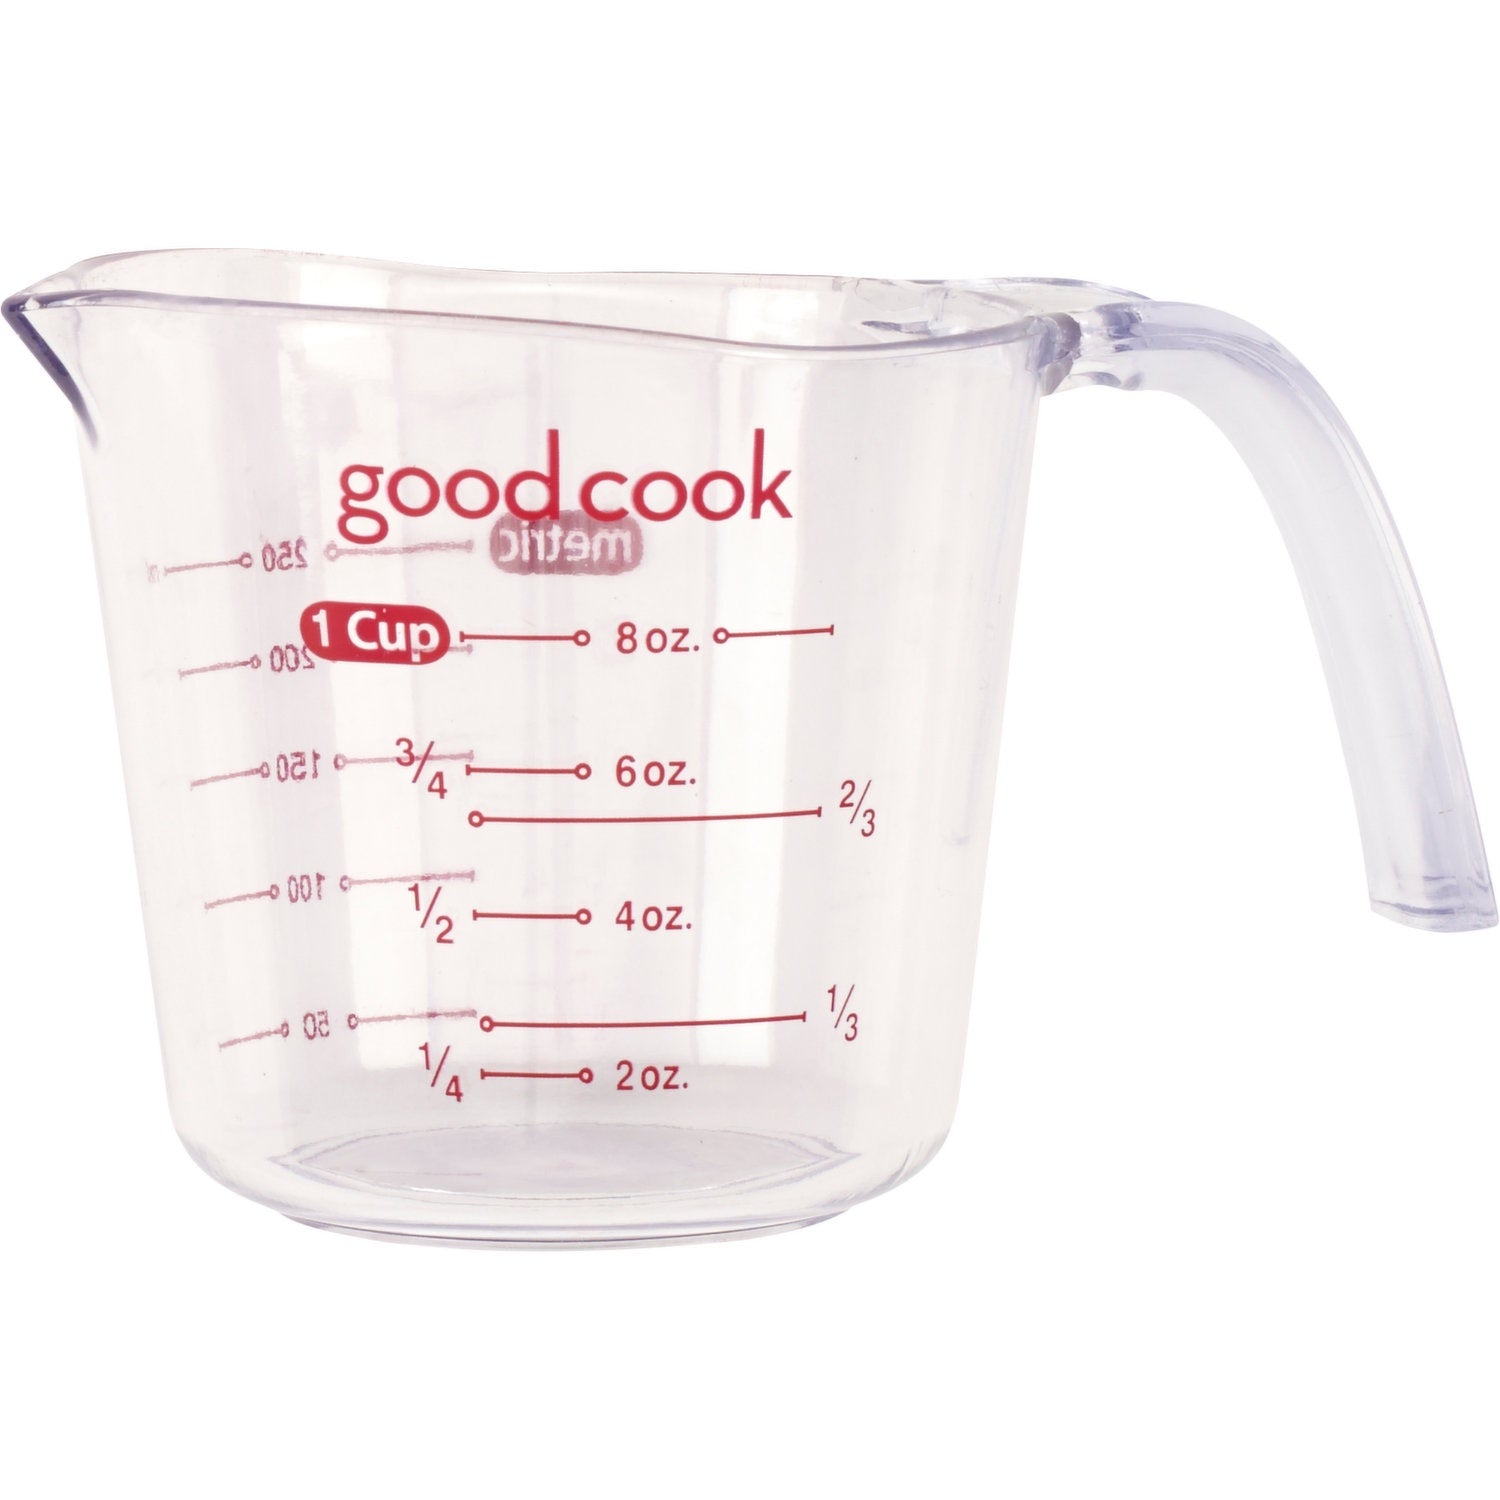 Good Cook 1 Cup Measuring Cup